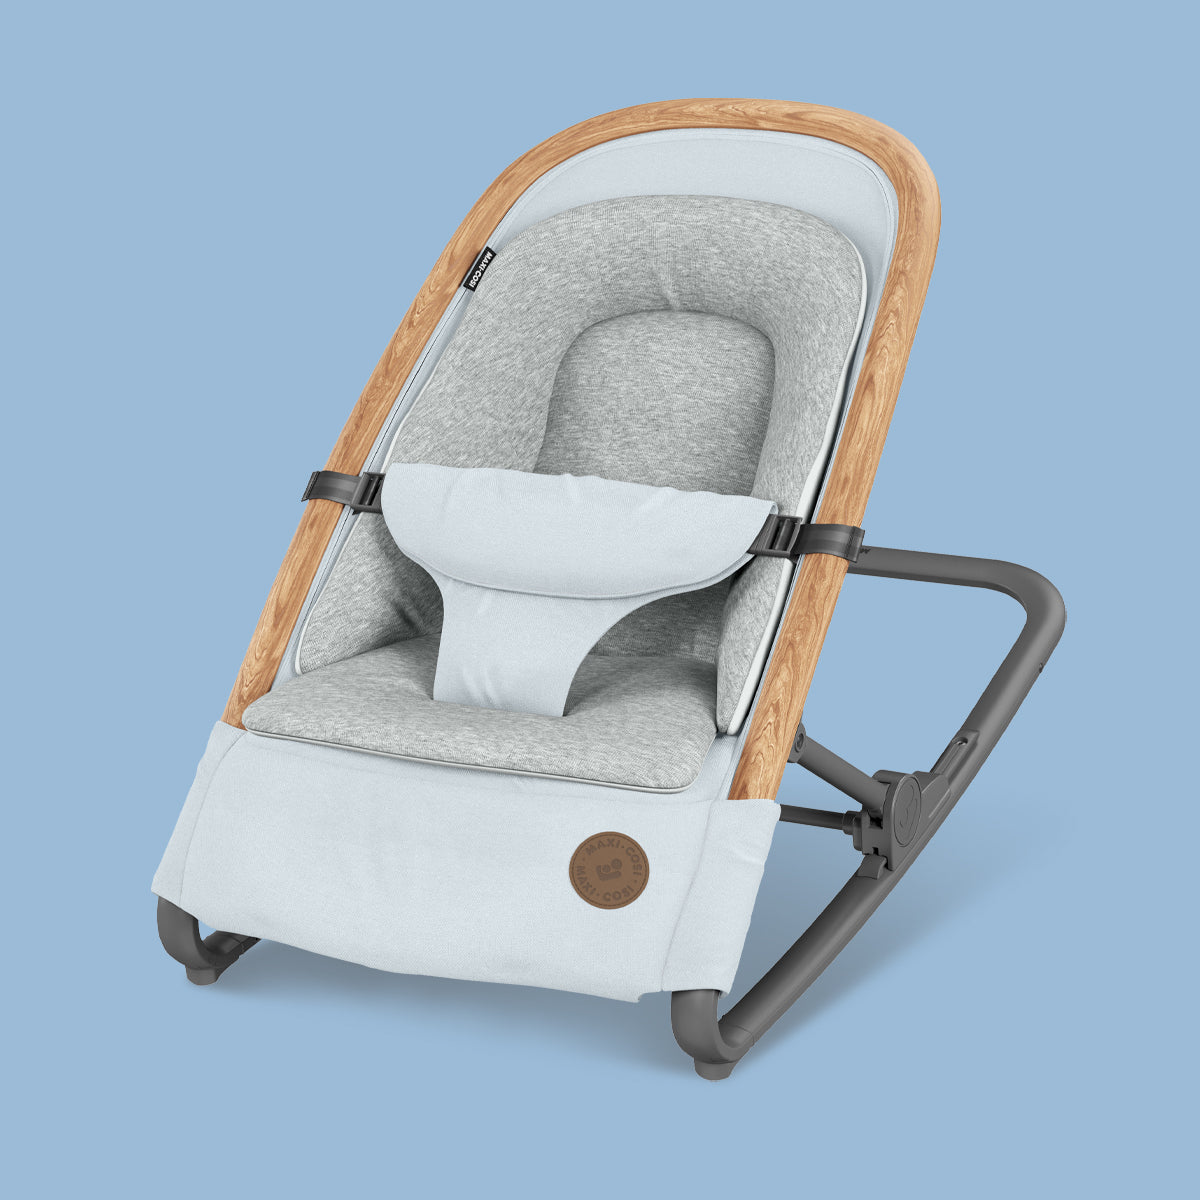 A relaxing Maxi-Cosi Kori Rocker with a wooden seat and a blue background from Maxi-Cosi UAE.